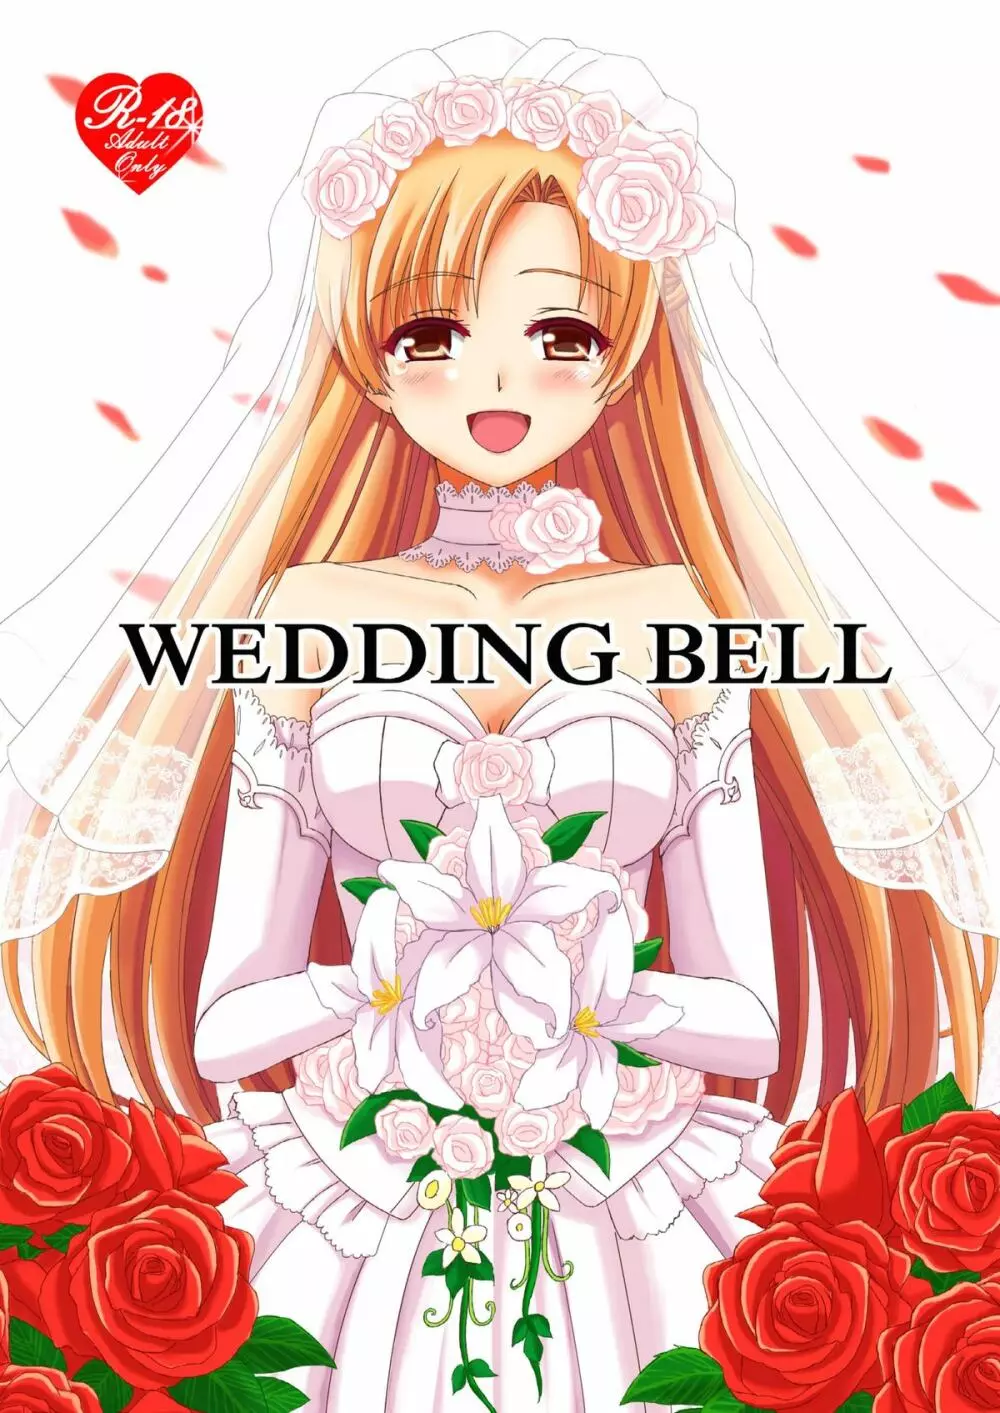 WEDDING BELL - page1